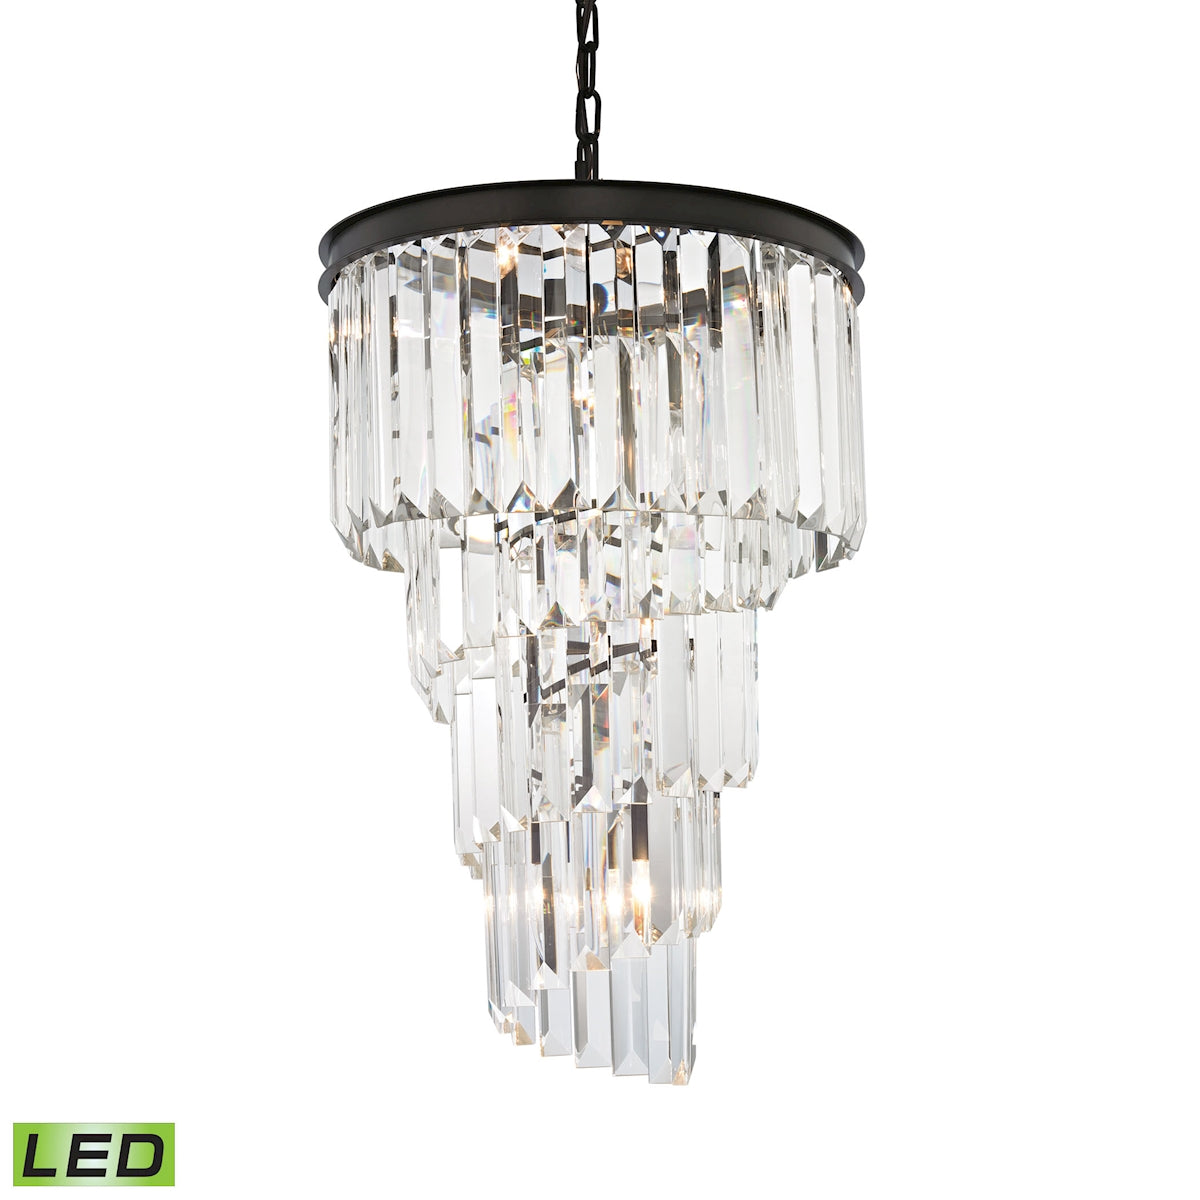 ELK Lighting 14217/6-LED Palacial 6-Light Chandelier in Oil Rubbed Bronze with Clear Crystal - Includes LED Bulbs